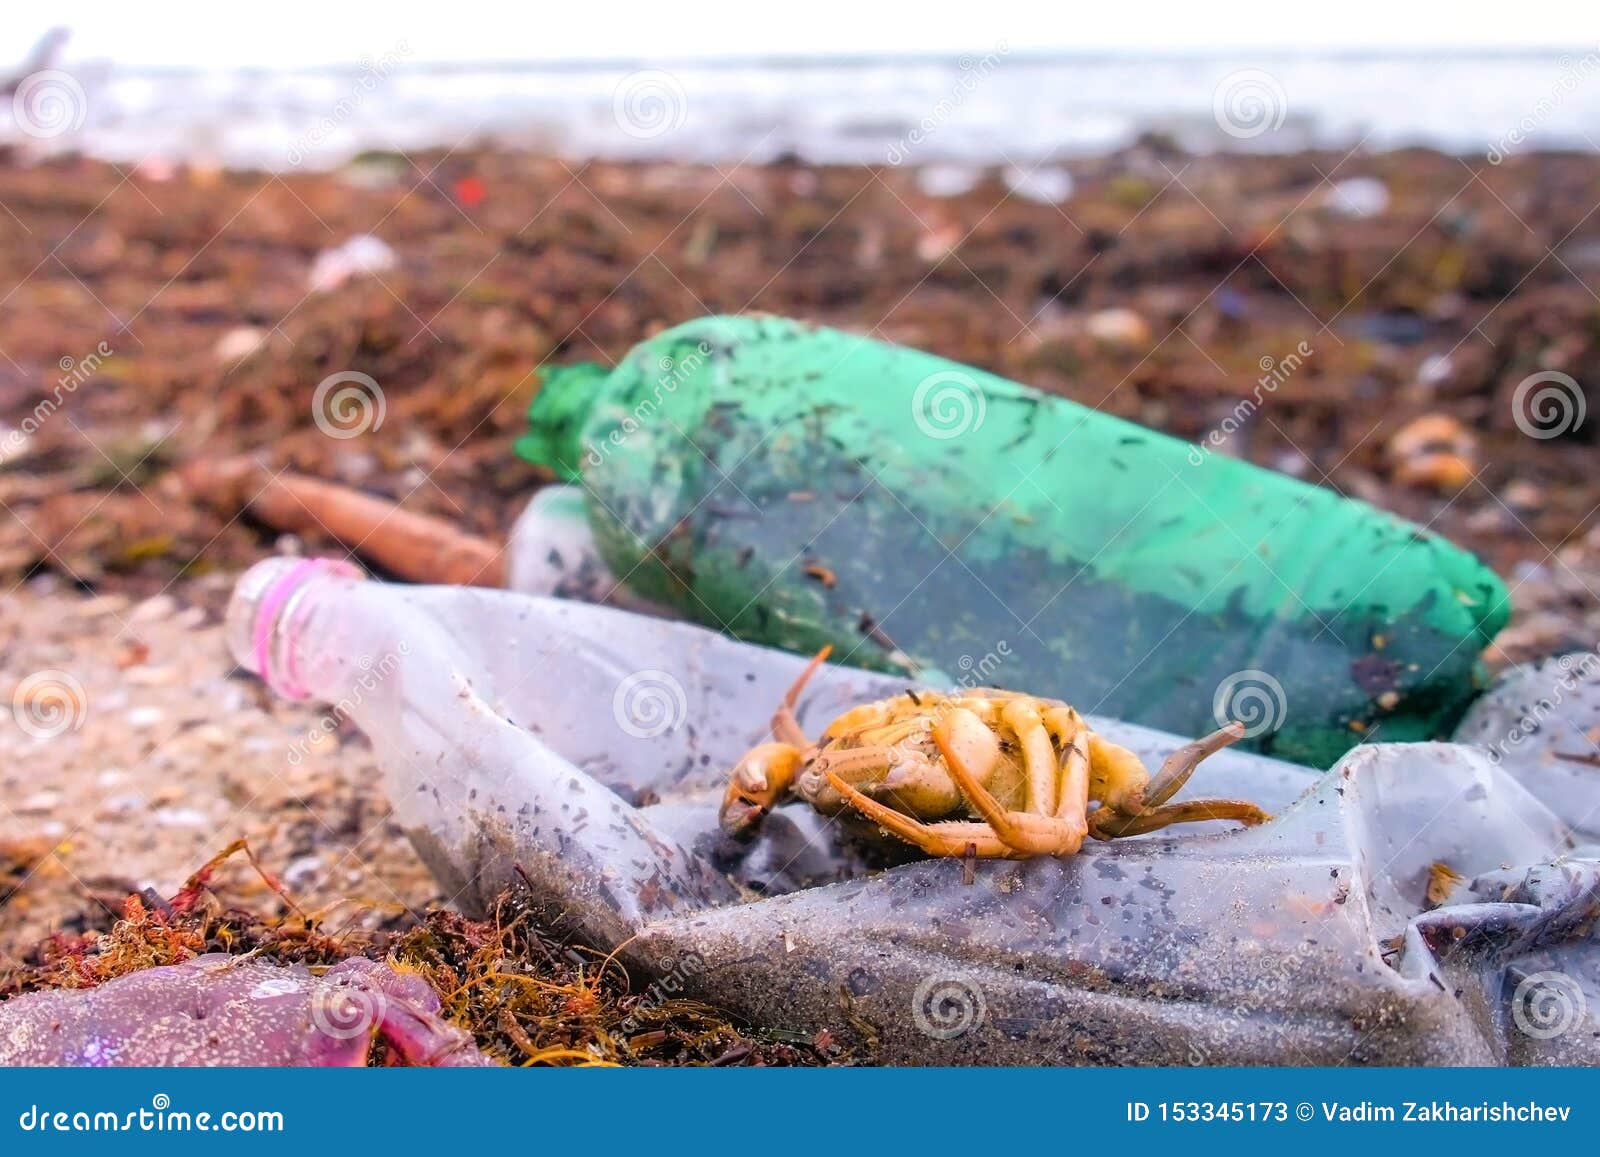 Plastic Bottles, Died Crabs and Other Debris among the Seaweed on the Sandy  Seashore. Stock Image - Image of algae, crab: 153345173